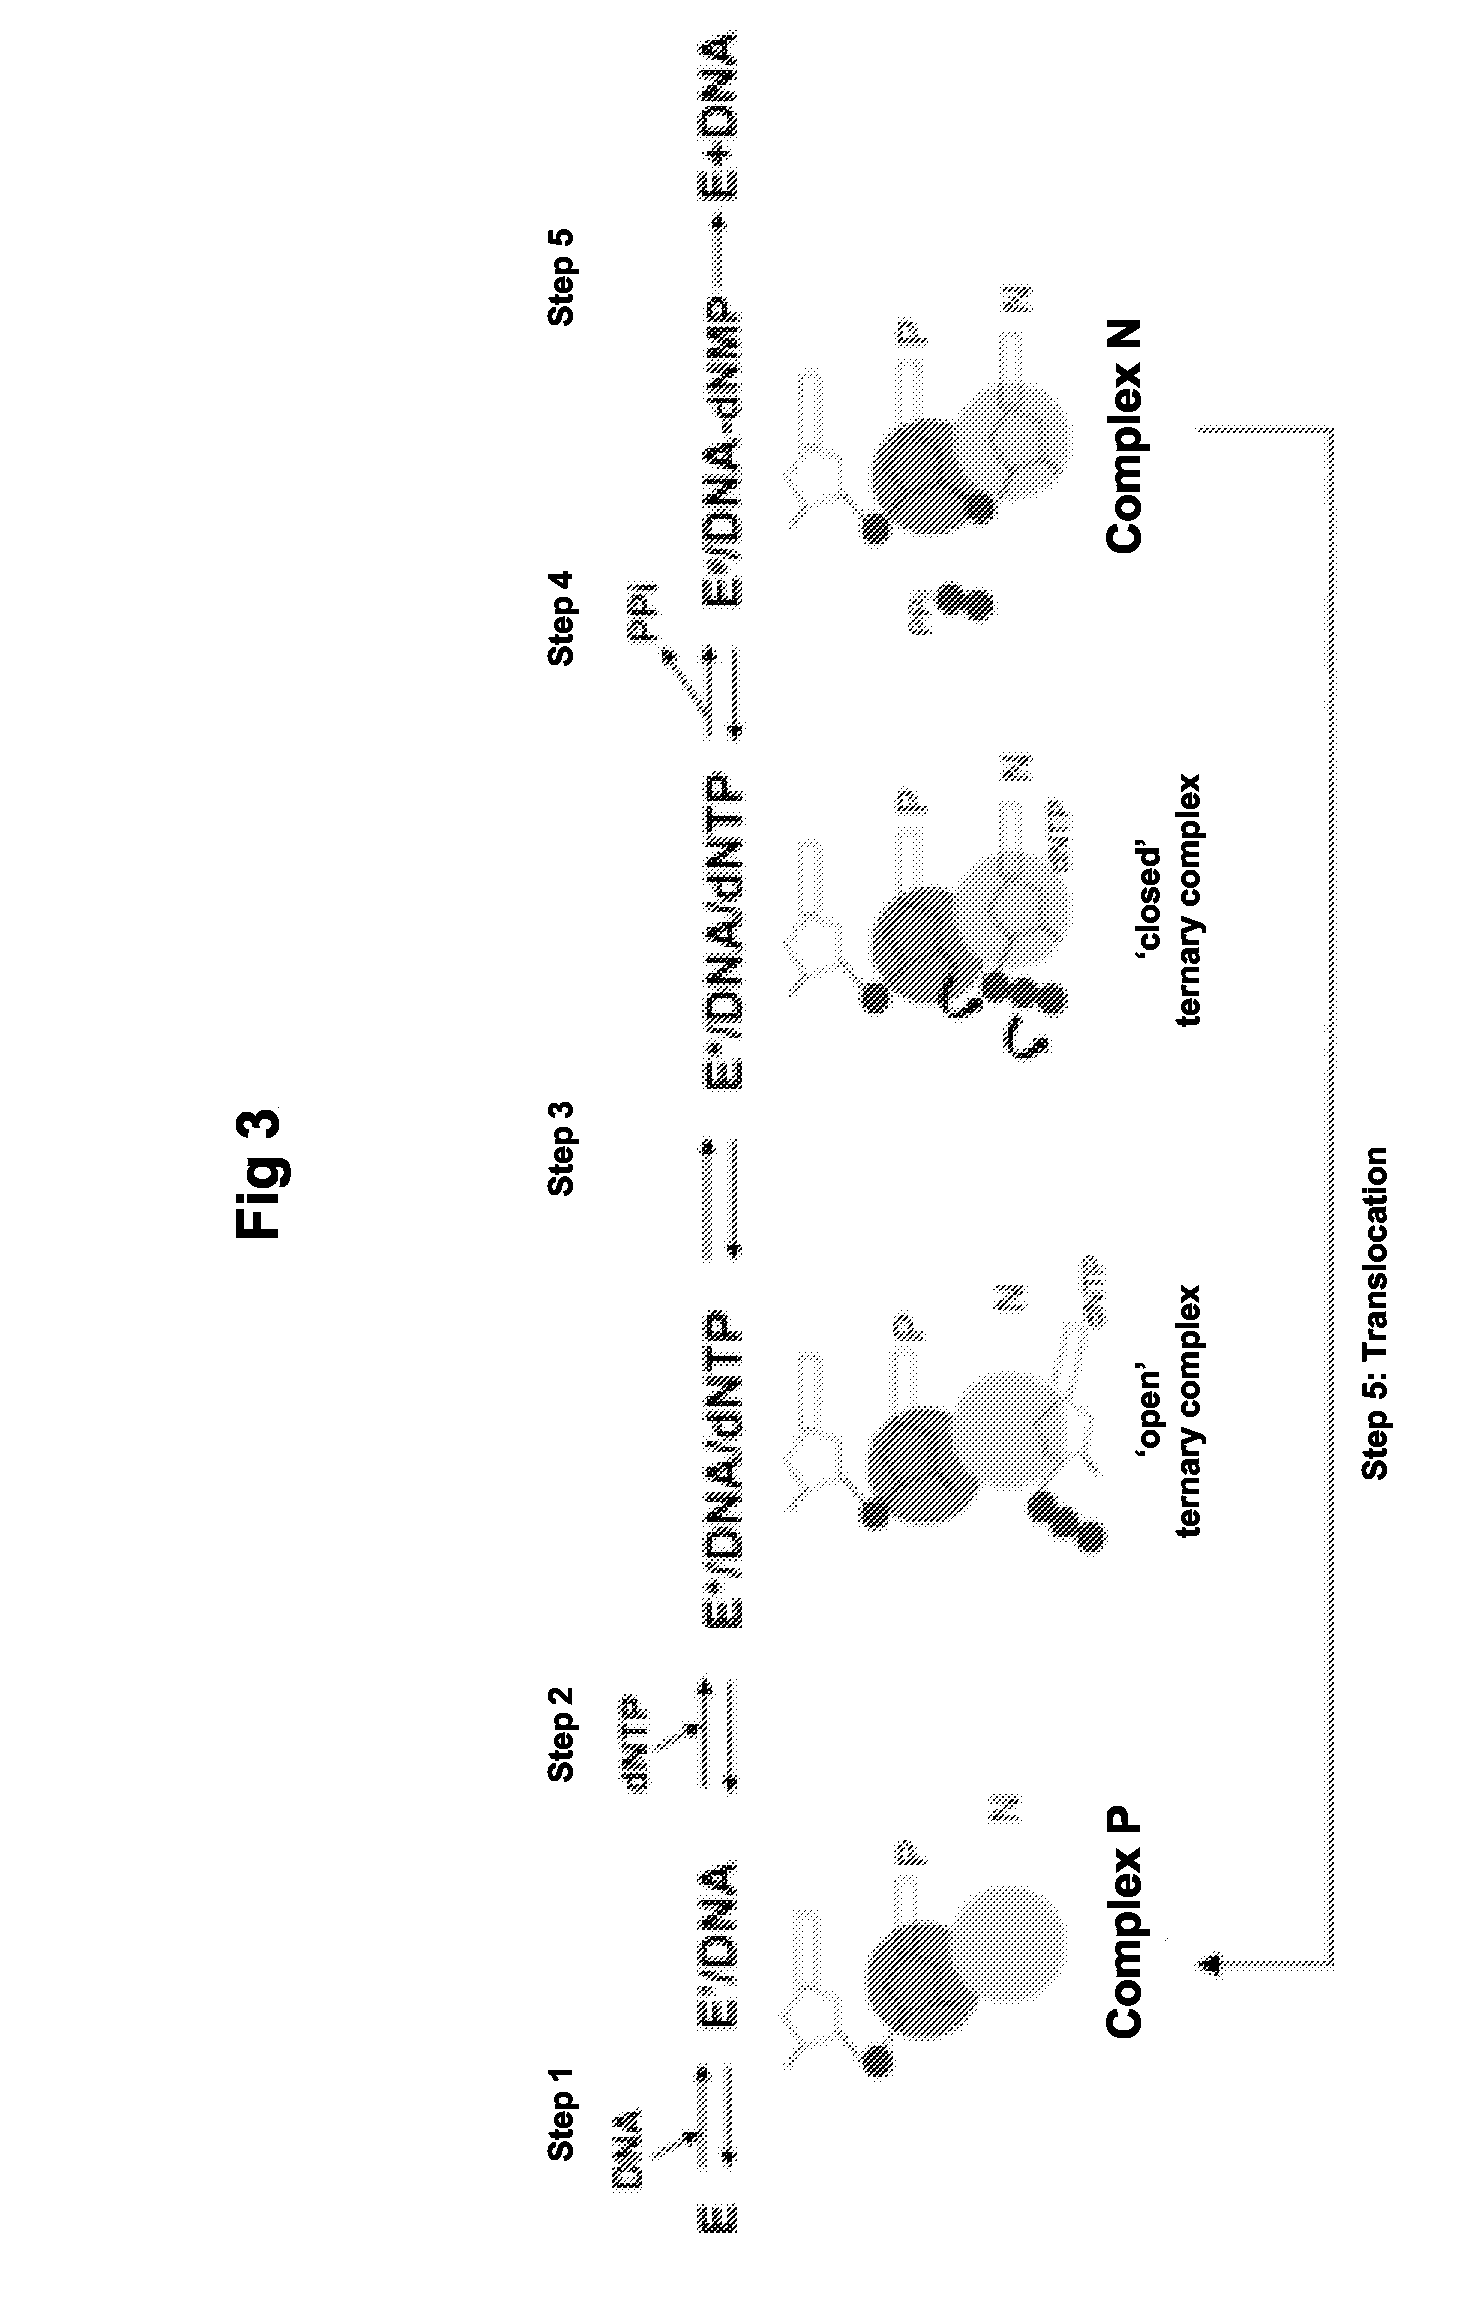 Compounds useful in the treatment of HIV